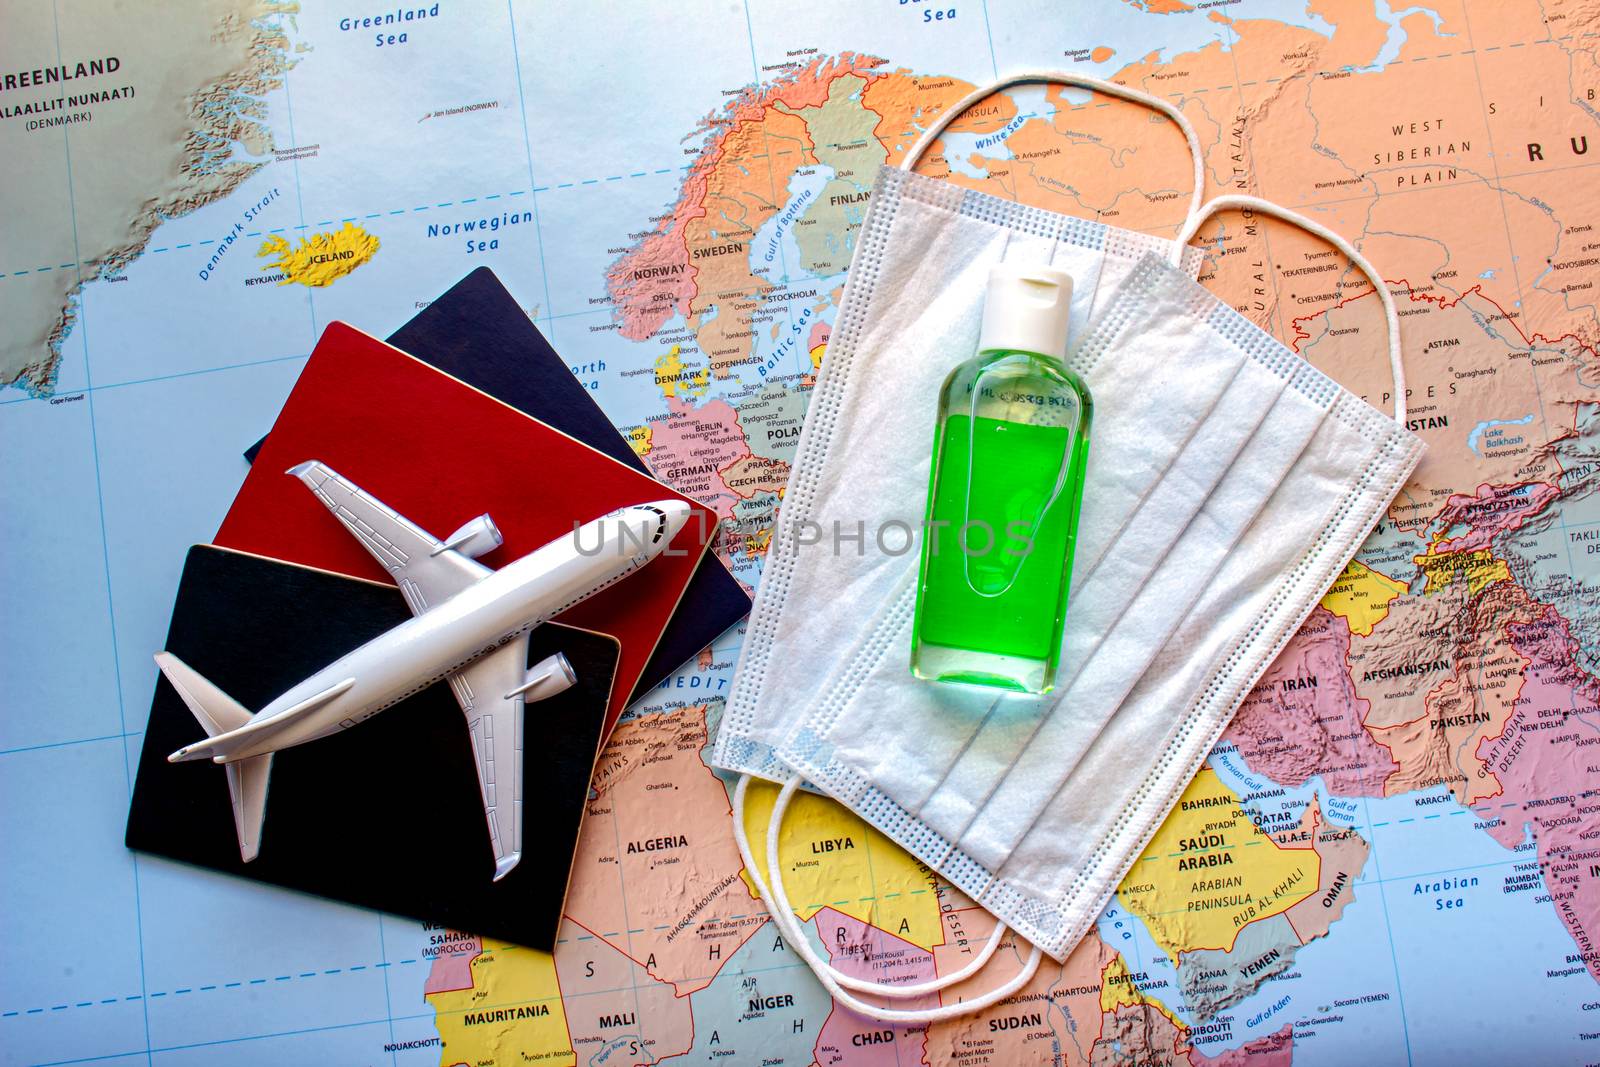 Passports with a plane and face mask and hand sanitizer on a world map. Concept traveling on a place during a global pandemic. Trave durin covid 19.l by oasisamuel